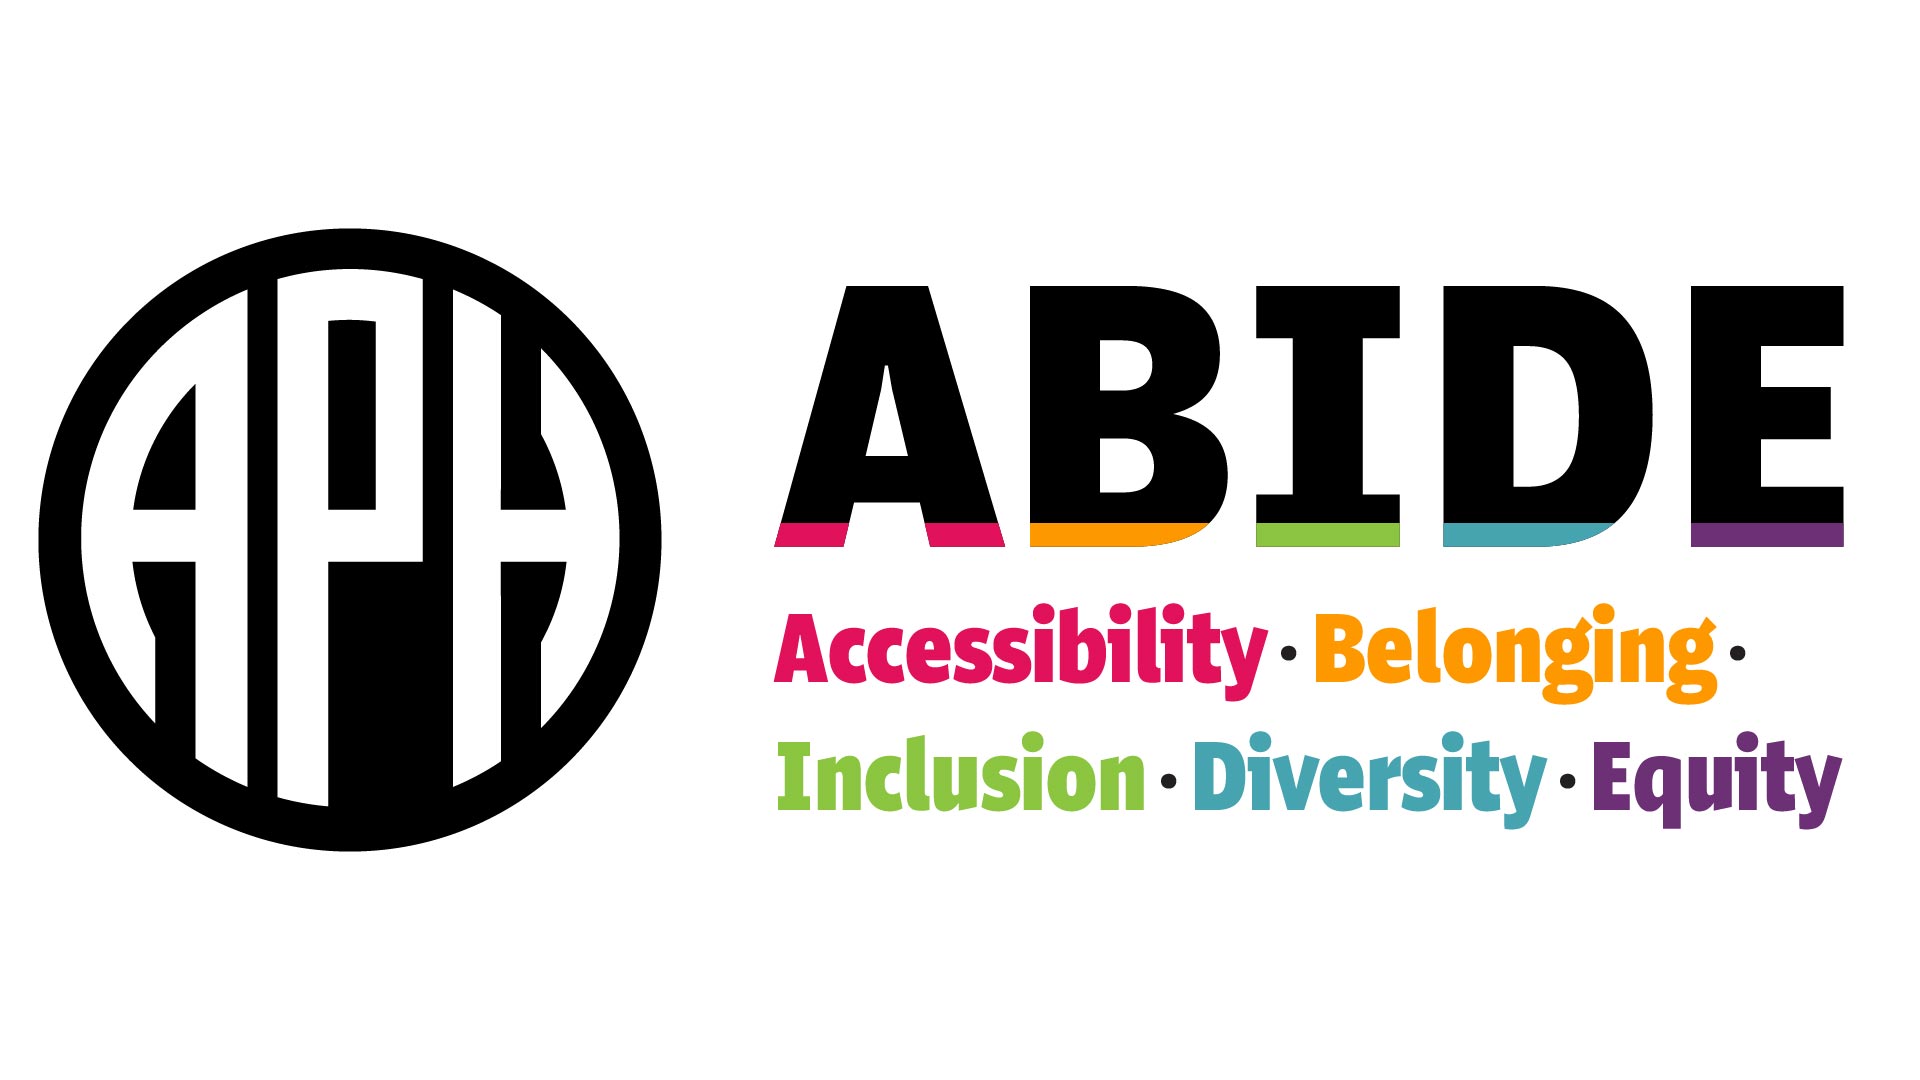 APH ABIDE logo. Under the acronym ABIDE are the words "Accessibility. Belonging. Inclusion. Diversity. Equity." in APH branding colors of pomegranate, gold, green, purple, and teal.